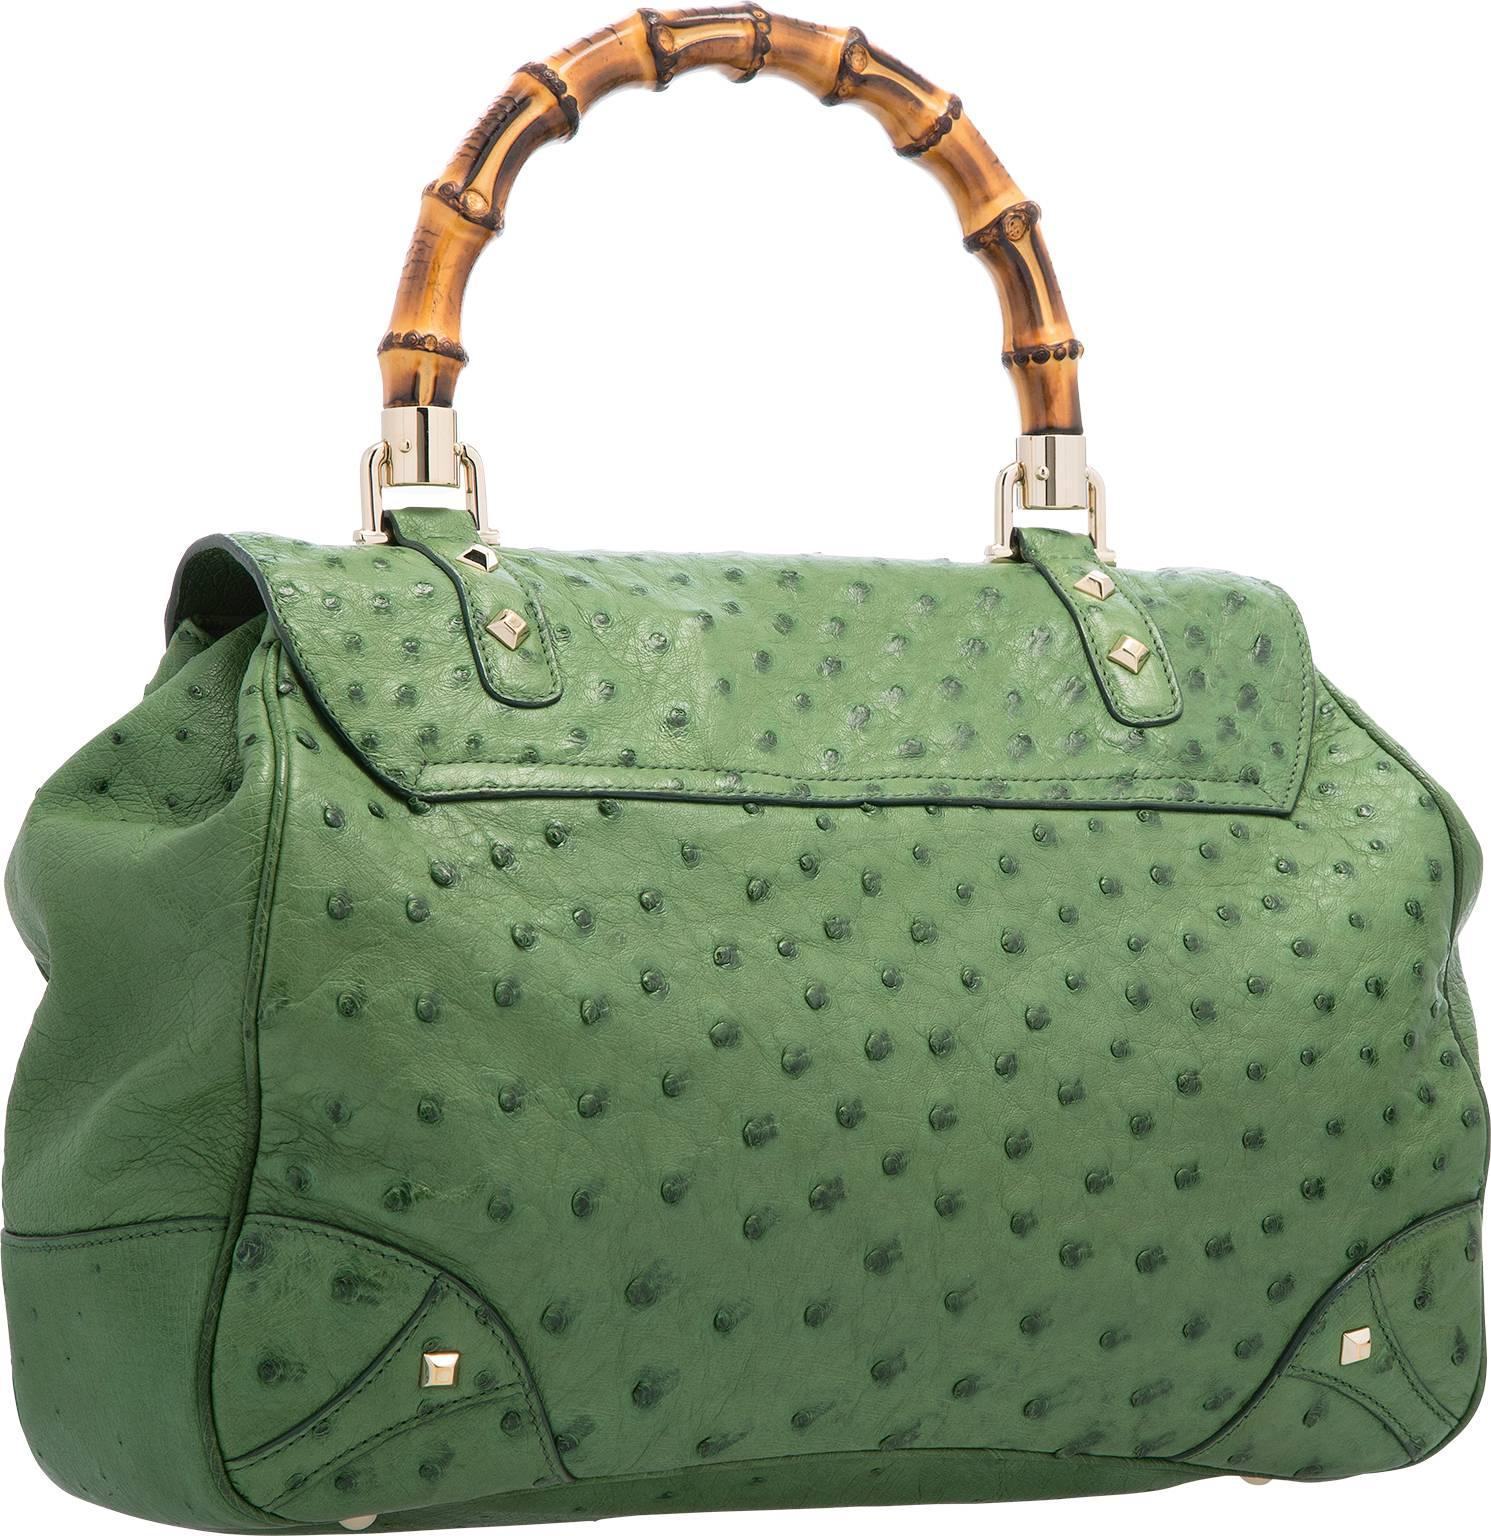 A fabulously luxurious Gucci bag, this iconic look is so highly recognizable and sought after. This bag is done in green ostrich, featuring one bamboo top handle, and a flap top with a bamboo turnlock closure. The interior is done in green suede,